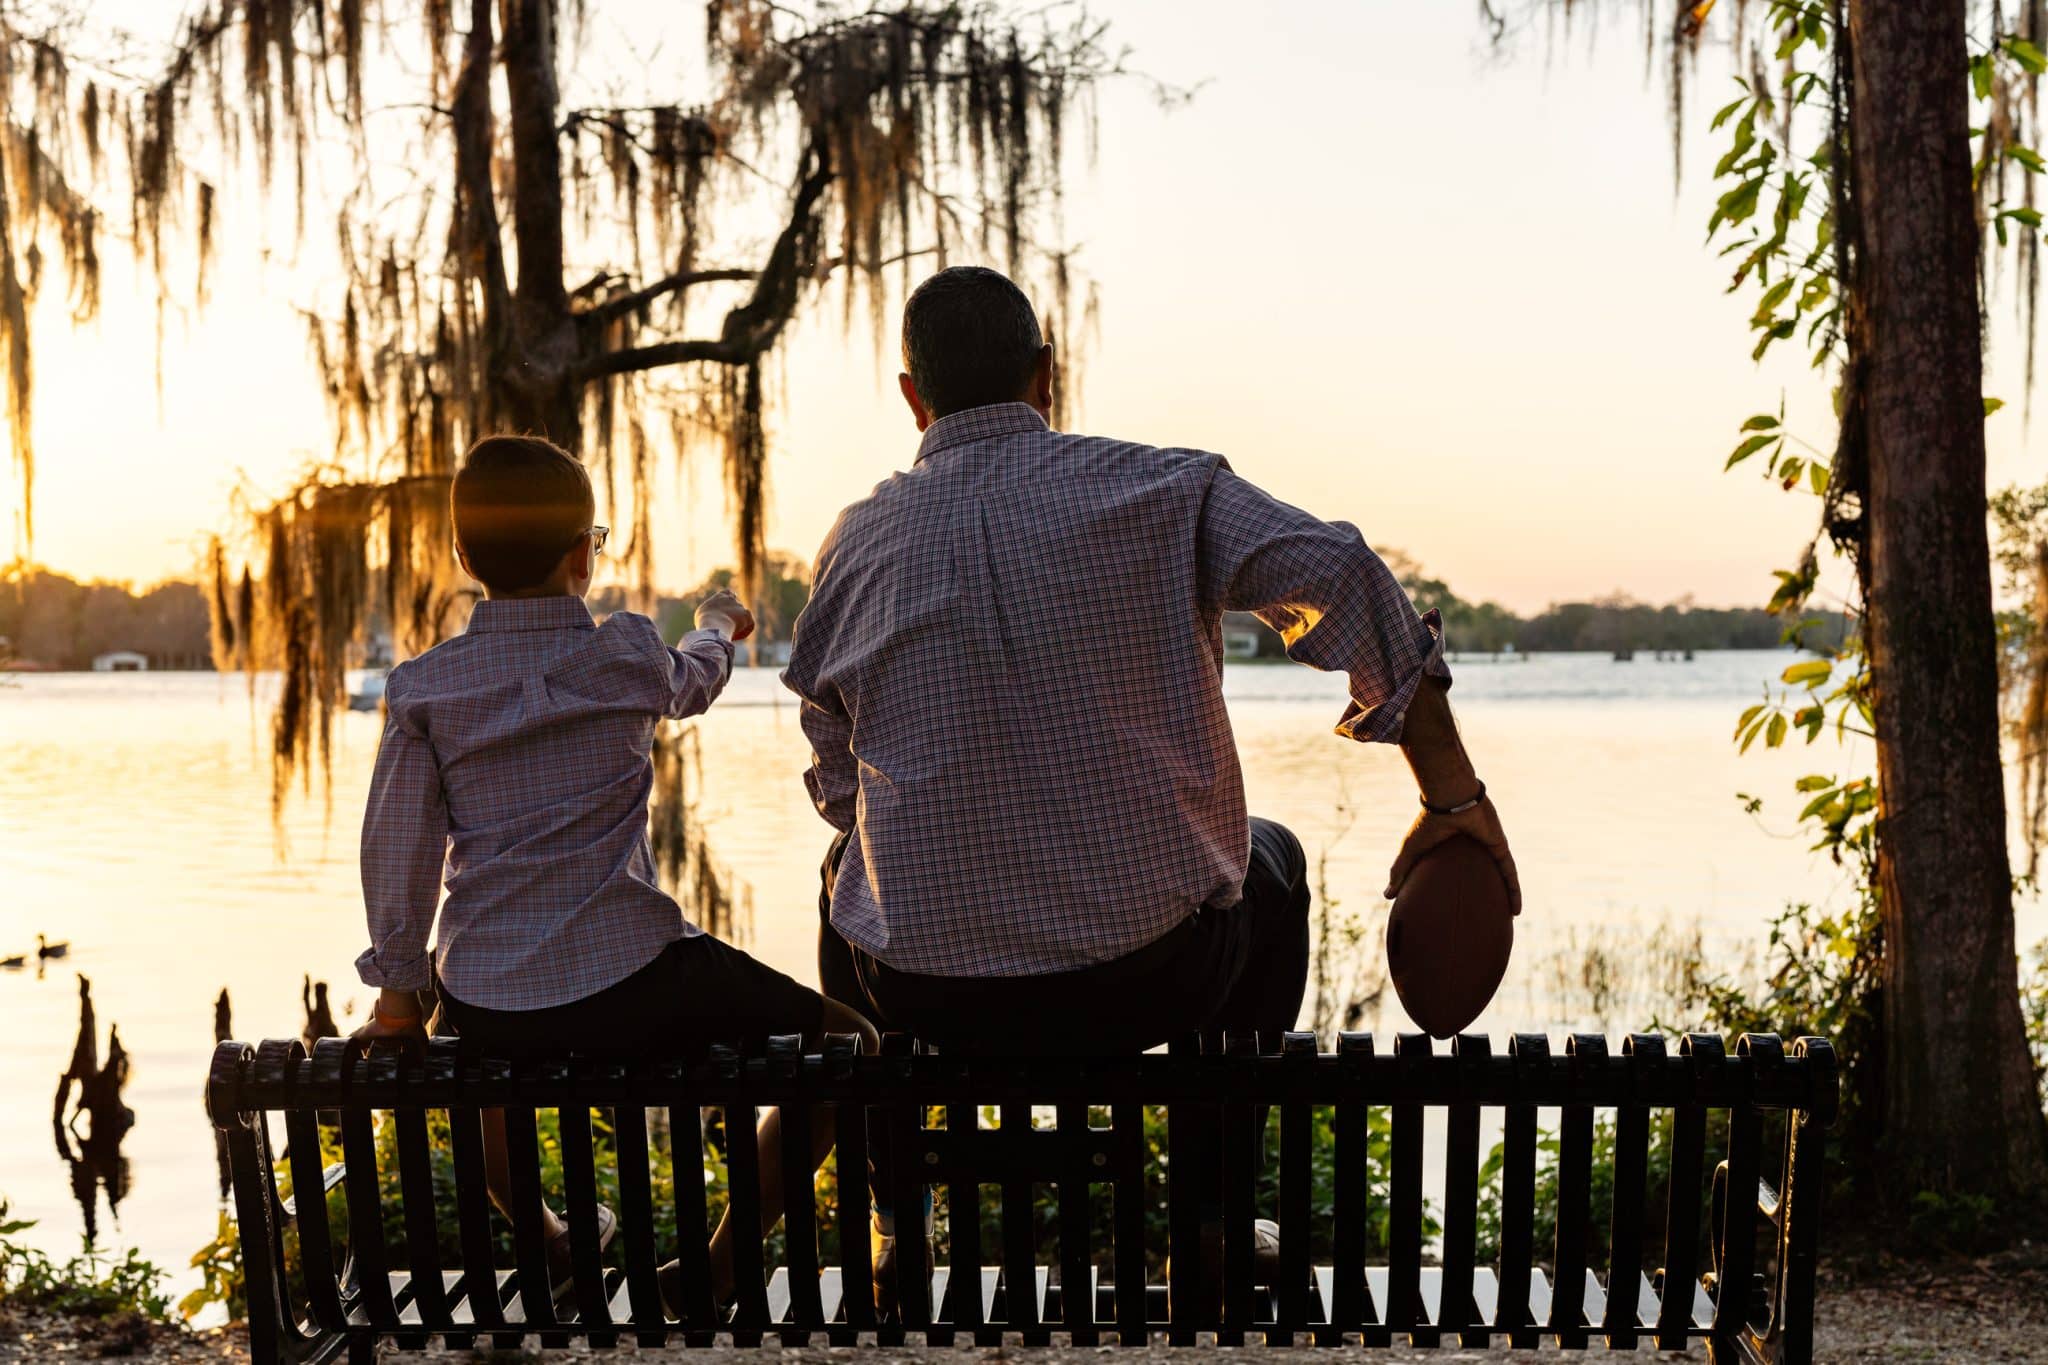 Jim and son sitting on park bench looking out at a Central Florida lake at sunset